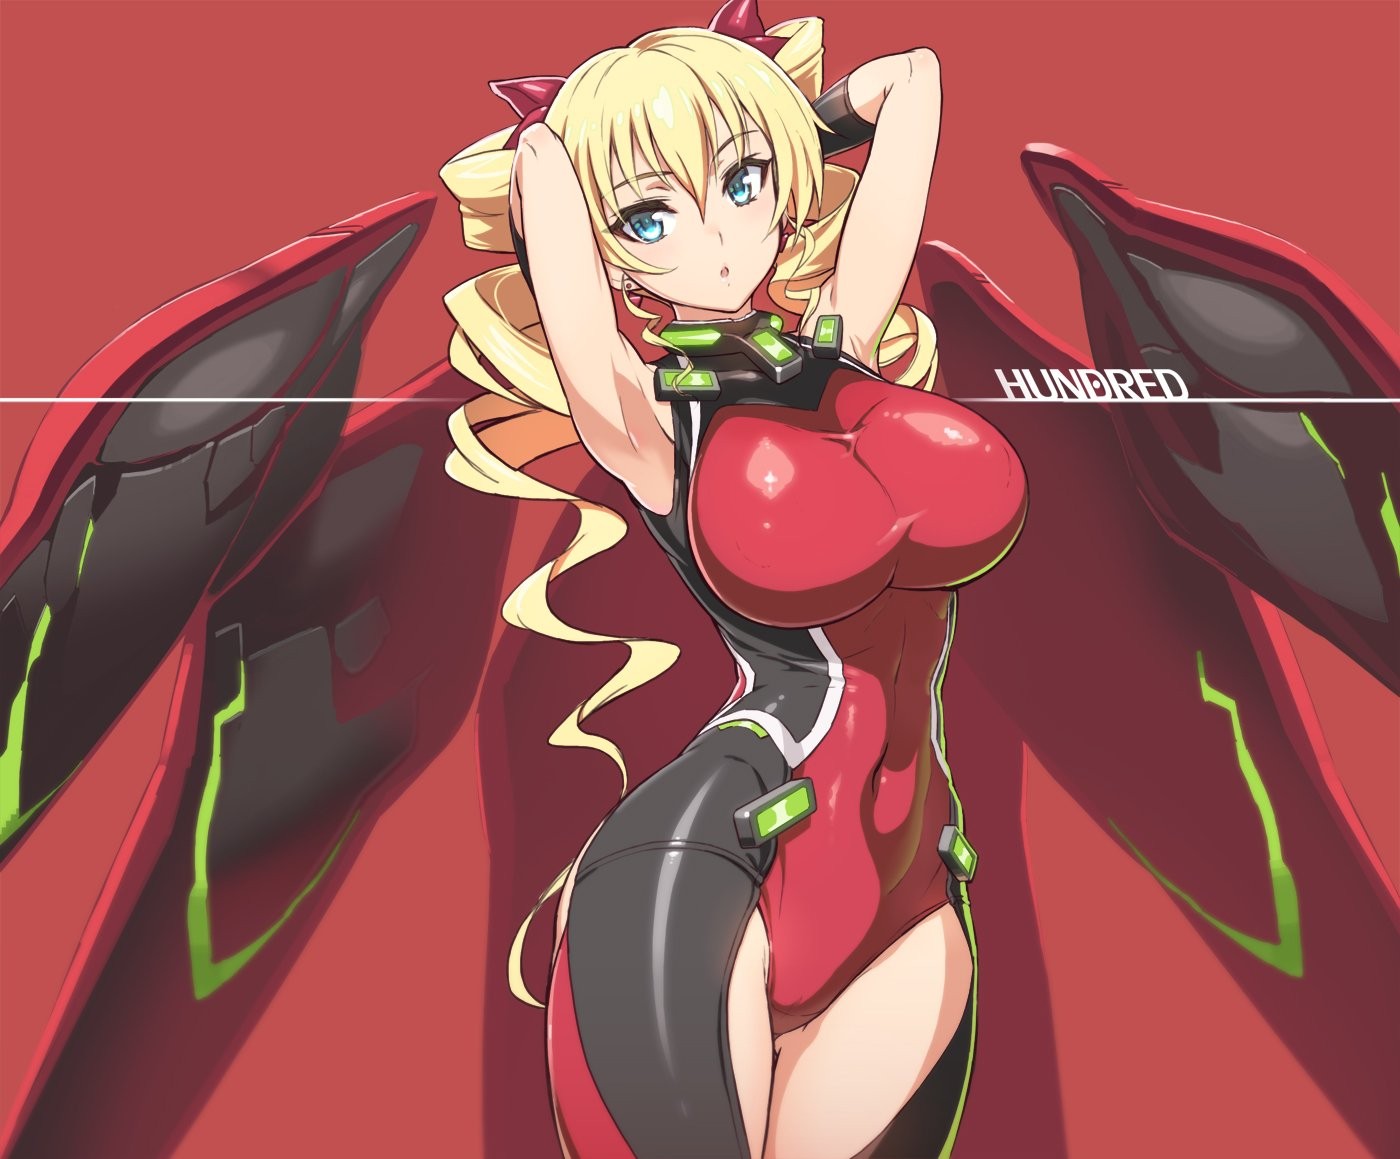 Anime 1400x1159 Hundred Claire Harvey long hair twintails bodysuit big boobs blonde blue eyes anime girls huge breasts boobs curvy wings red background anime